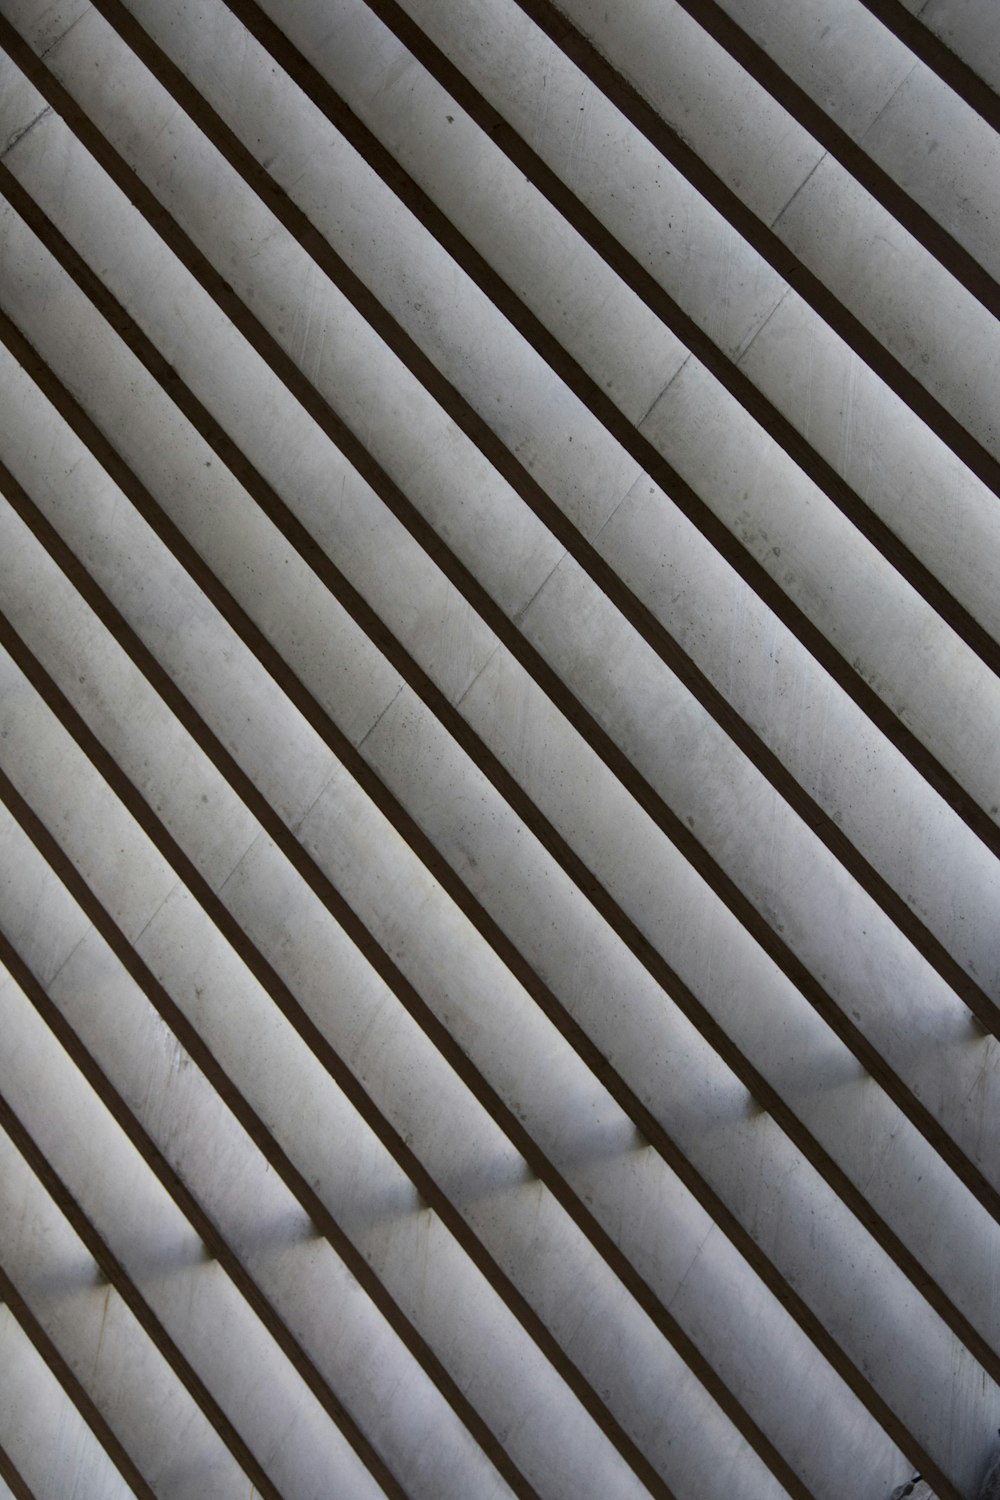 a close up of a metal structure with lines on it